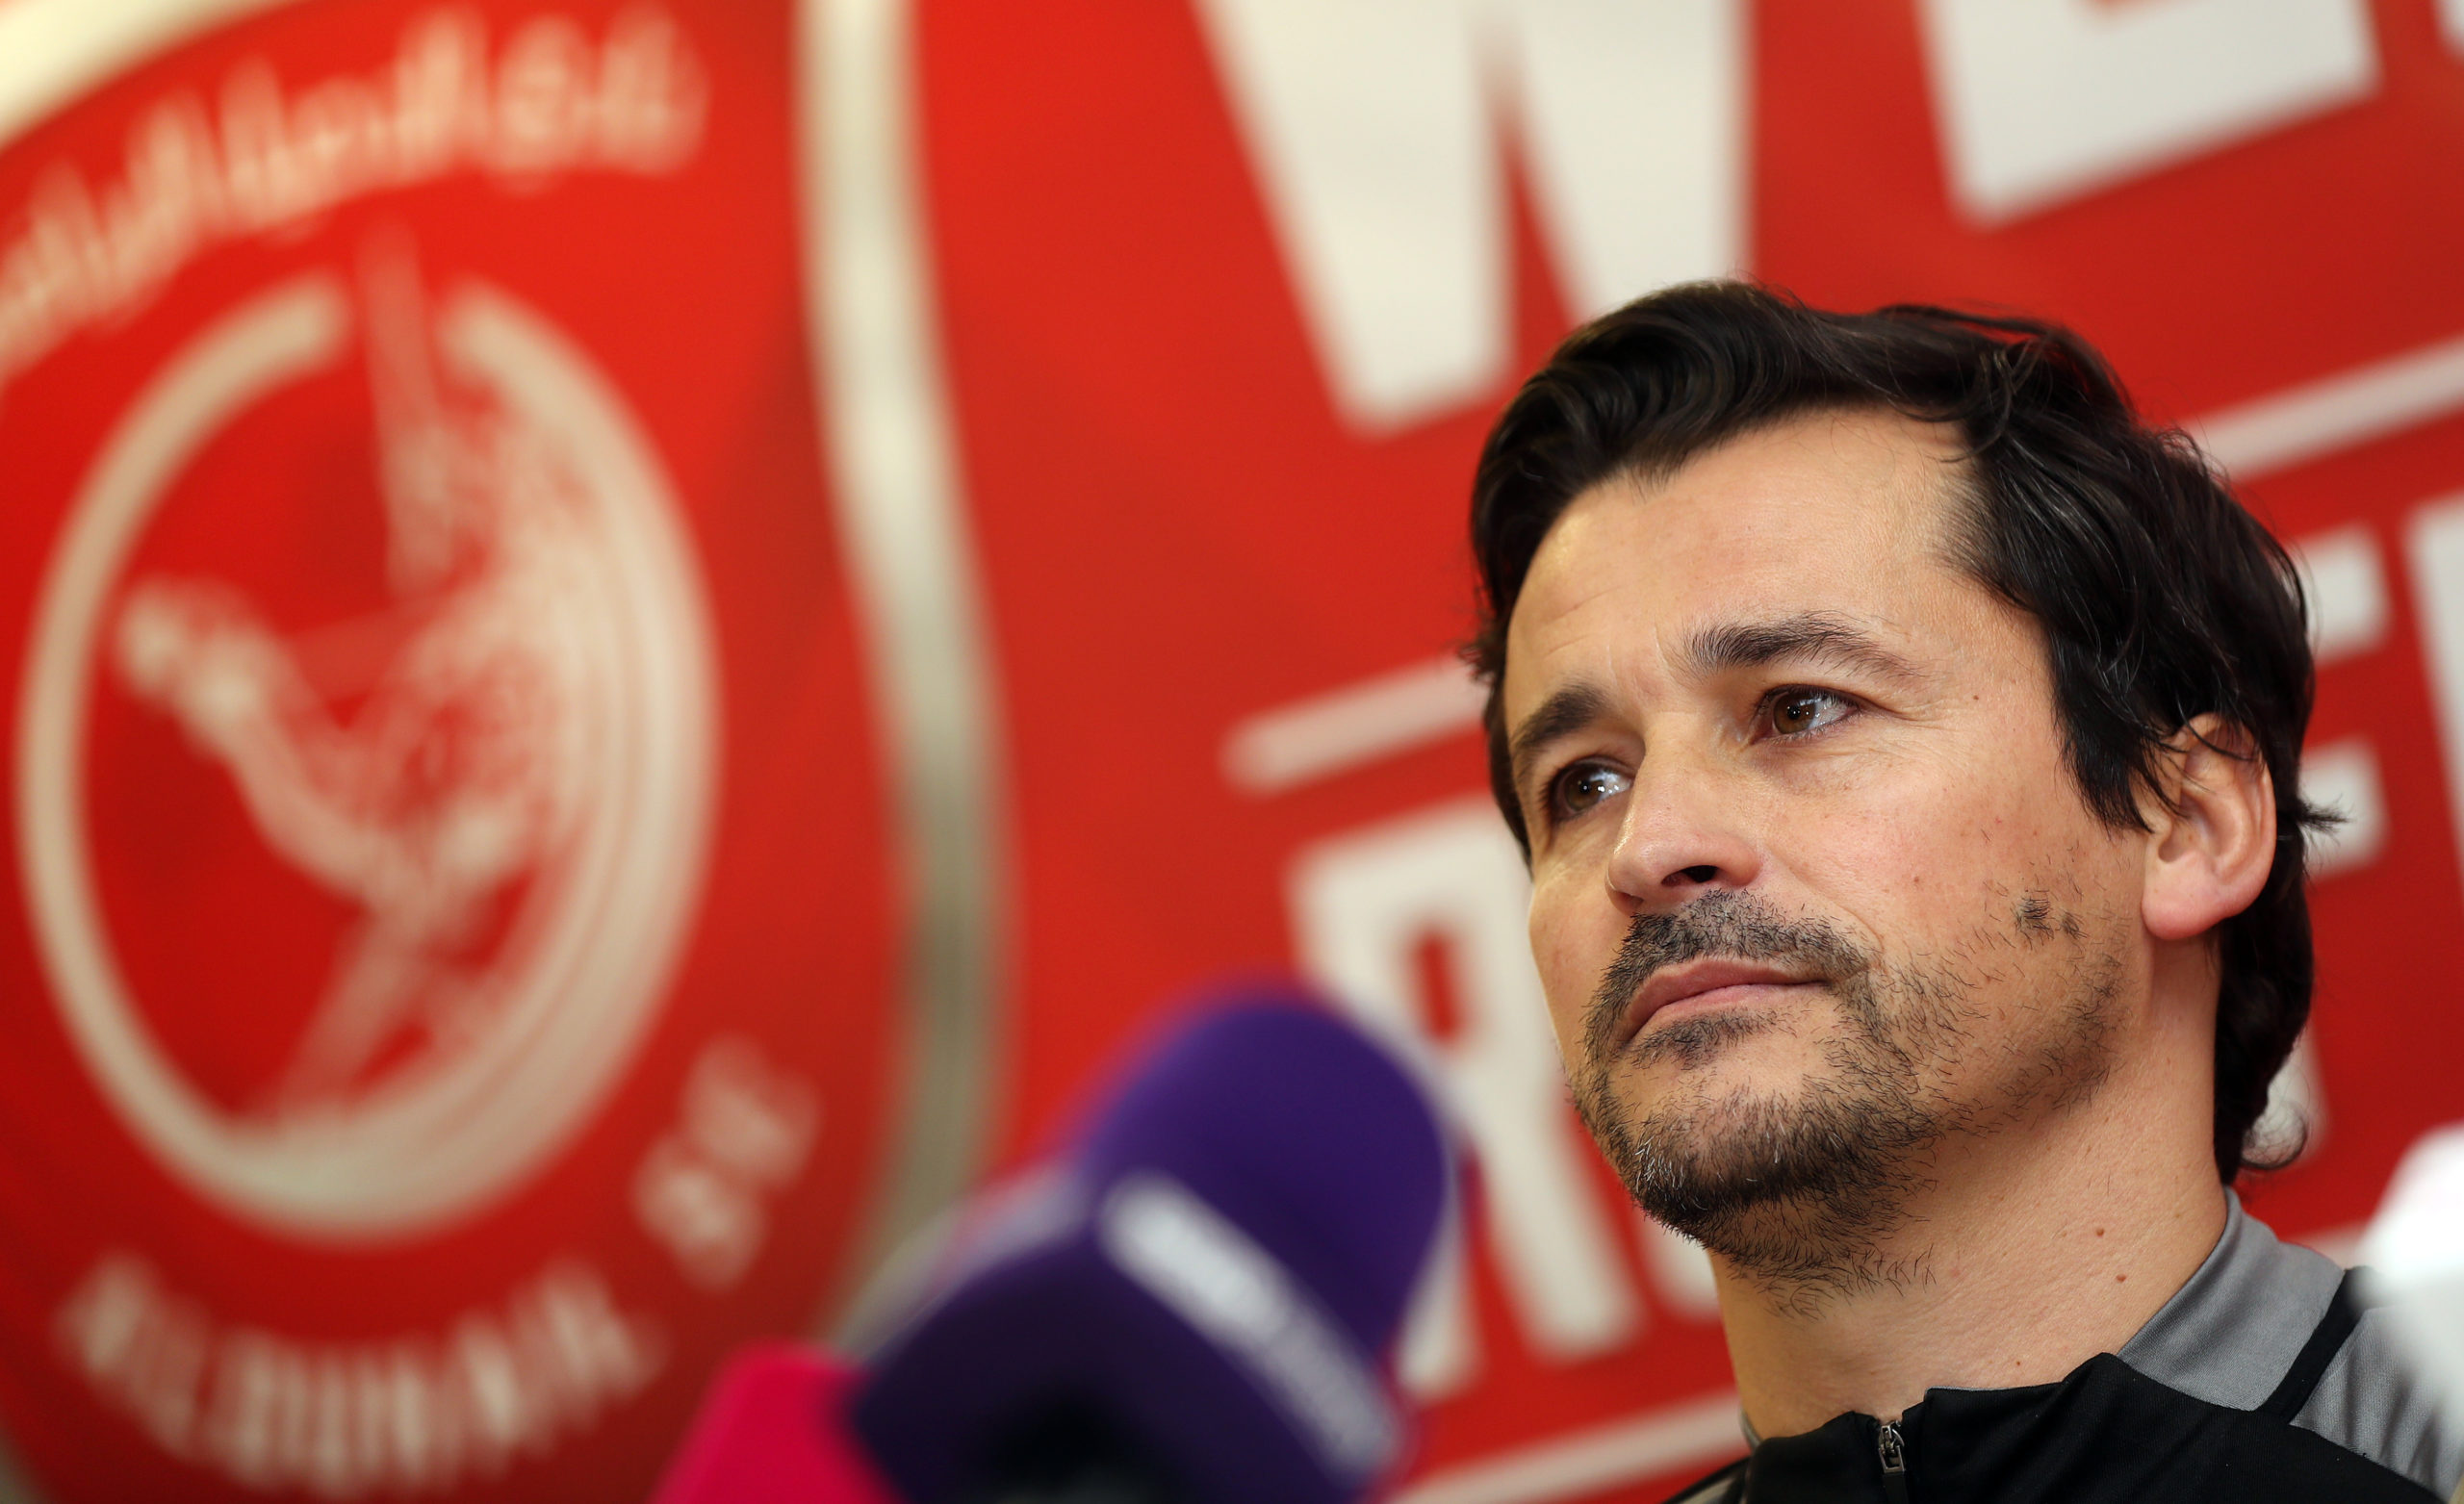 Rui Faria: an even tougher pitch to Celtic supporters than Ange Postecoglou